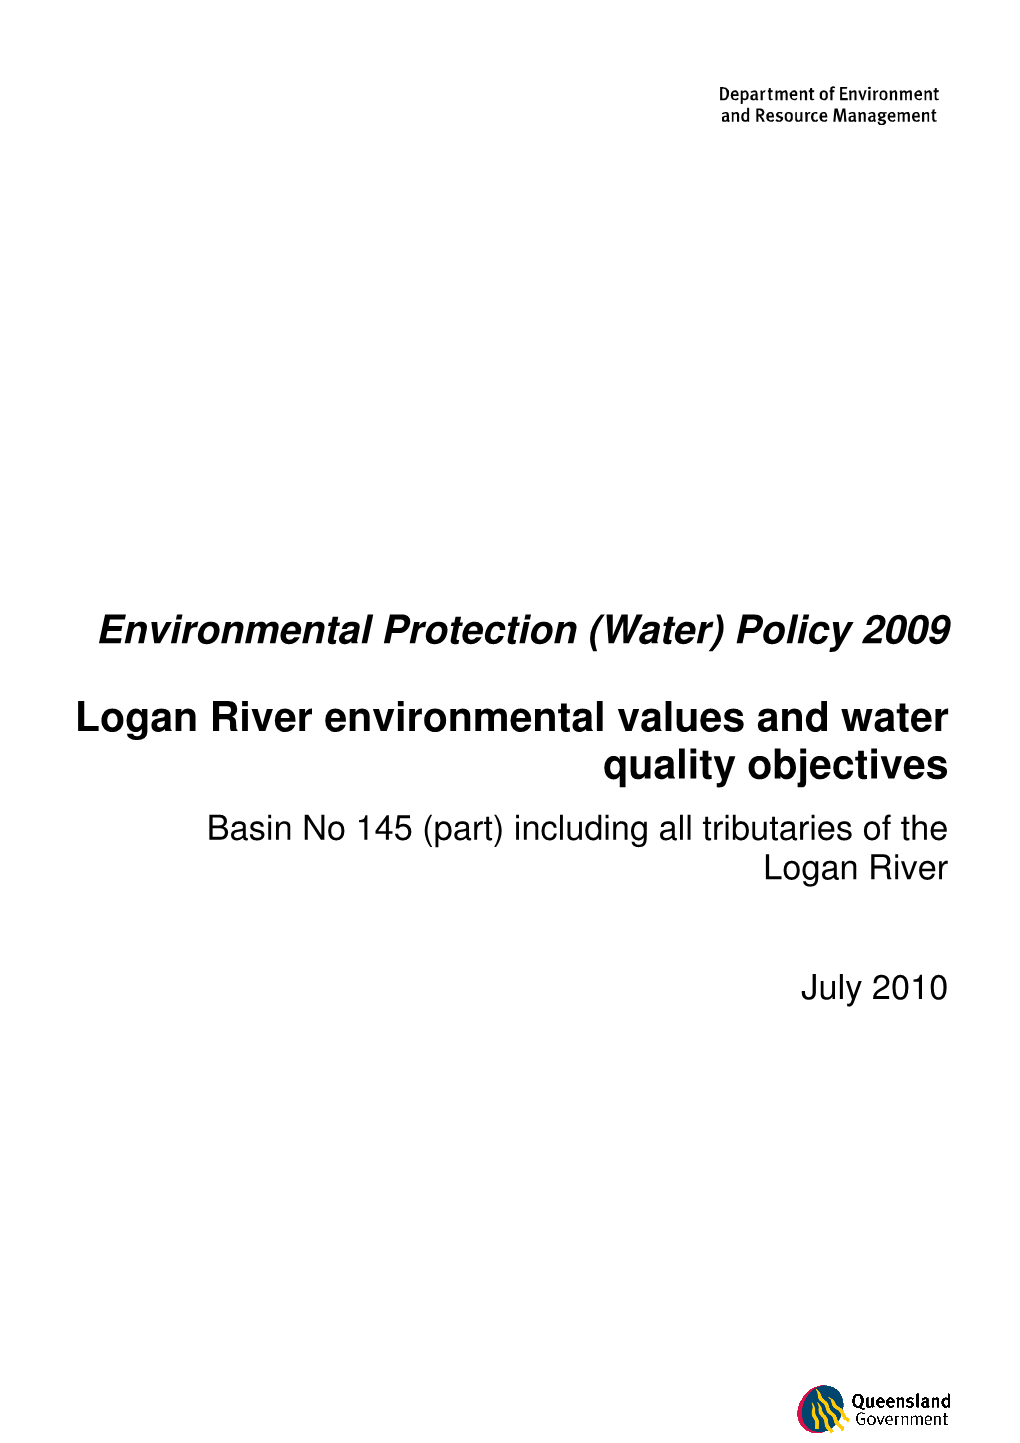 Logan River Environmental Values and Water Quality Objectives Basin No 145 (Part) Including All Tributaries of the Logan River